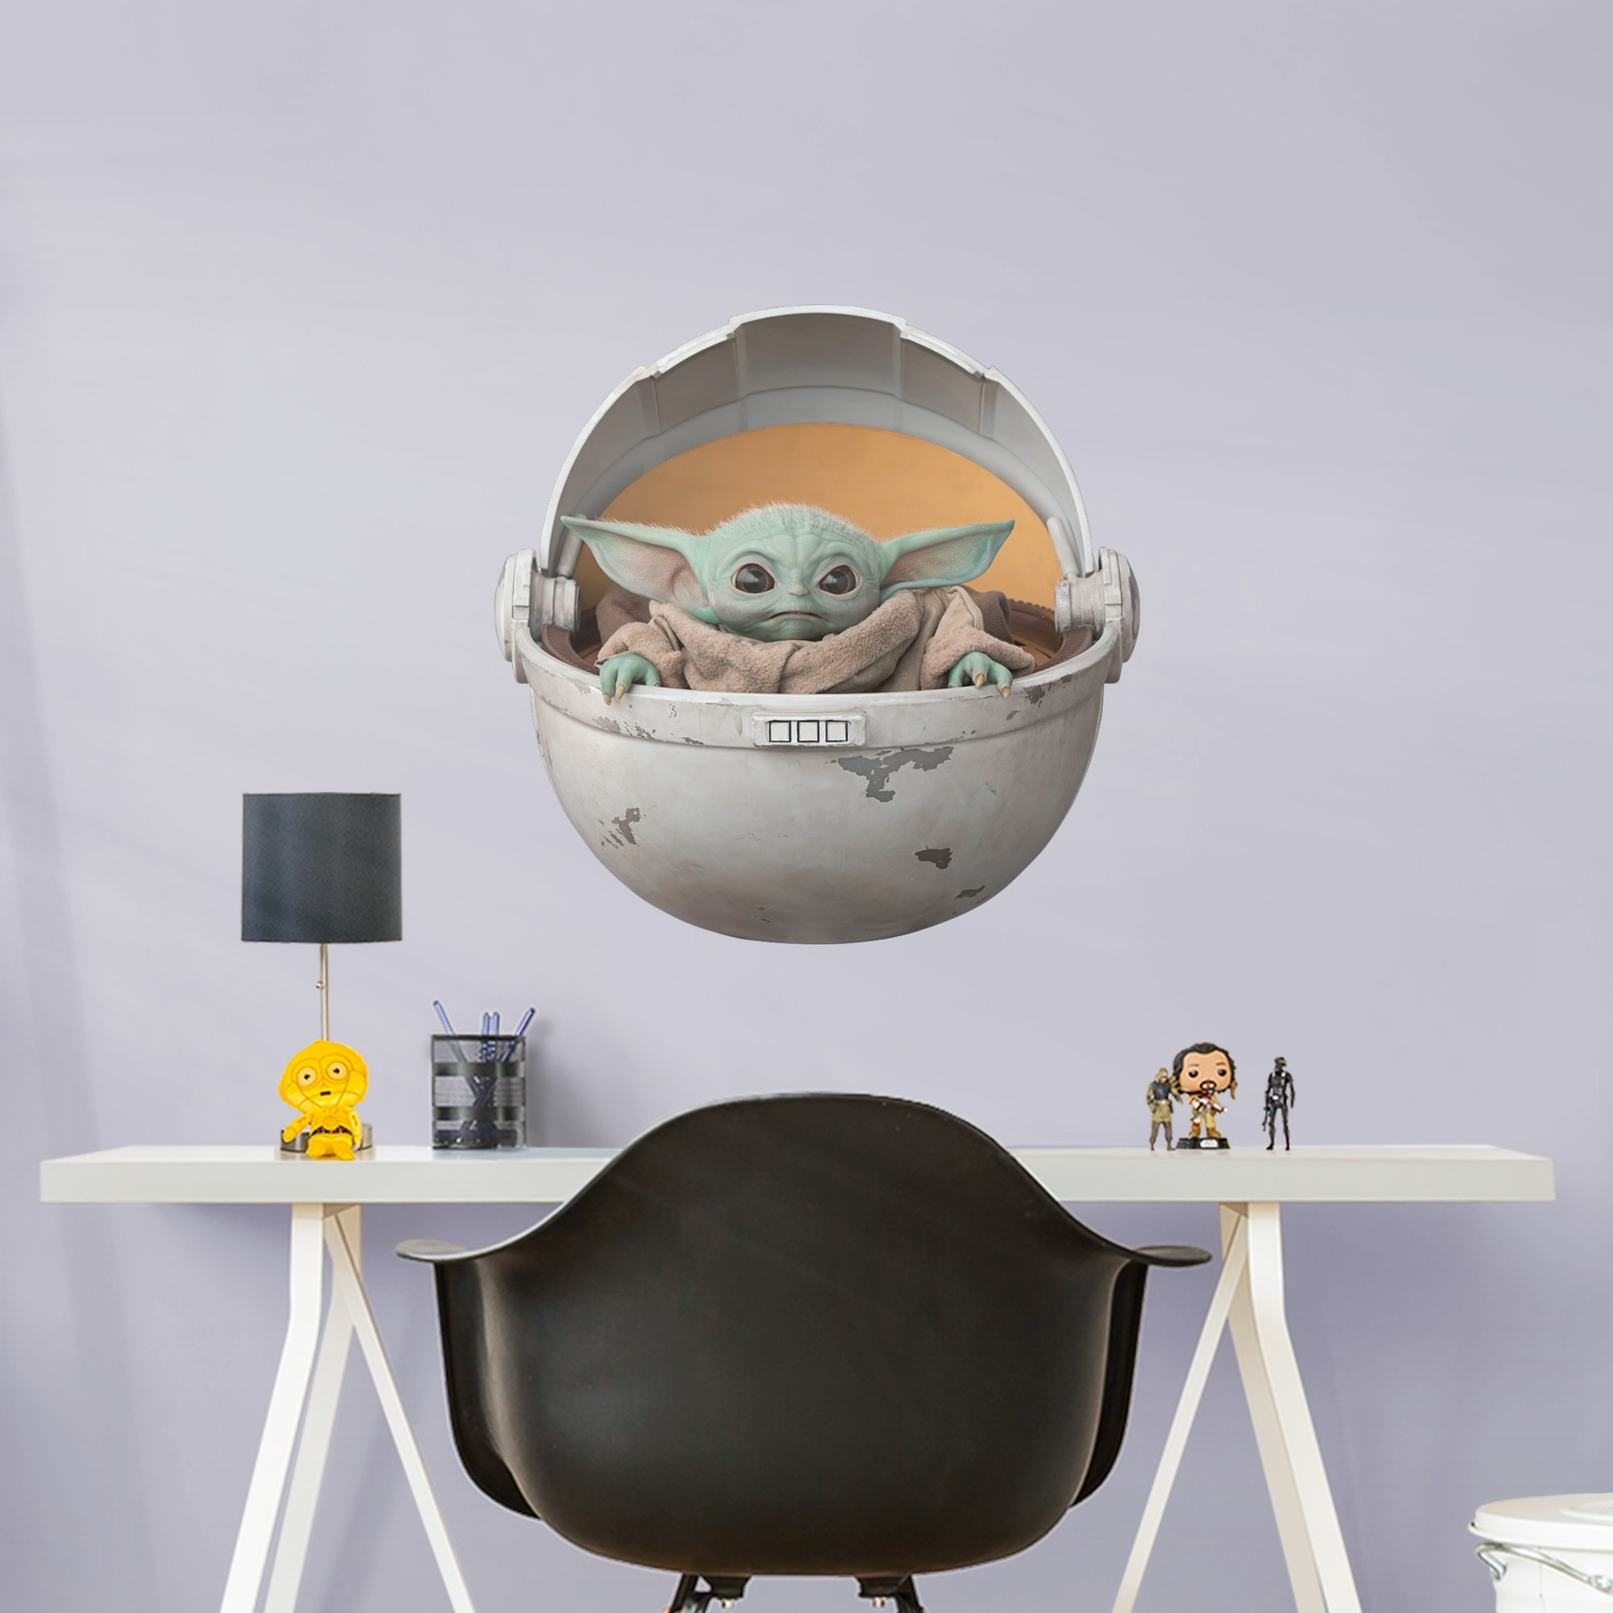 https://fathead.com/collections/star-wars/products/15-17447